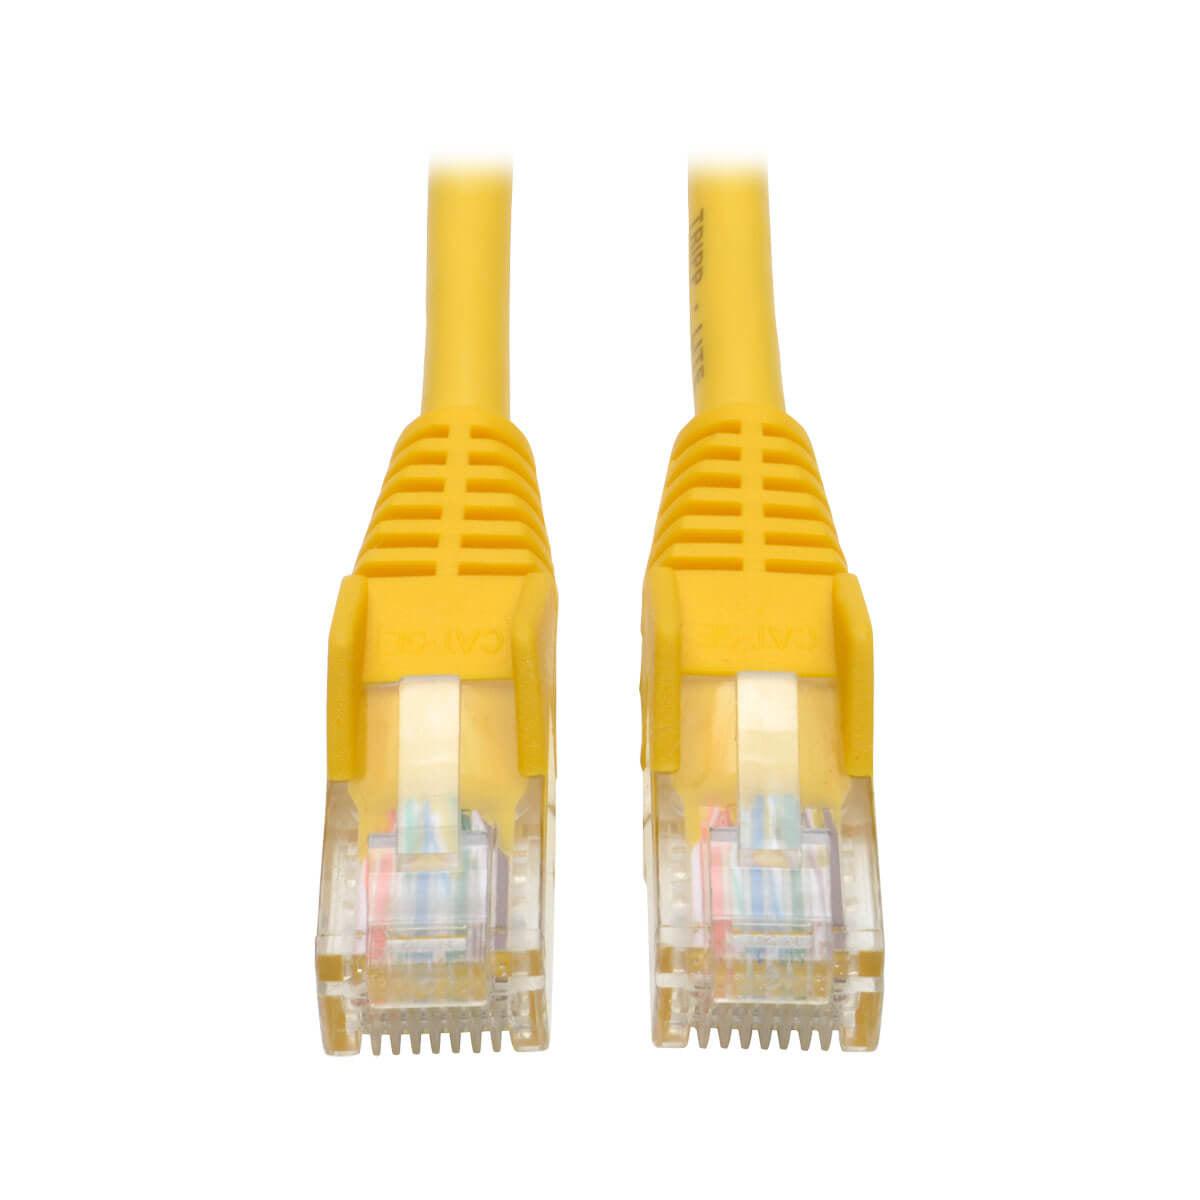 Tripp Lite N001-015-Yw Cat5E 350 Mhz Snagless Molded (Utp) Ethernet Cable (Rj45 M/M) - Yellow, 15 Ft. (4.57 M)